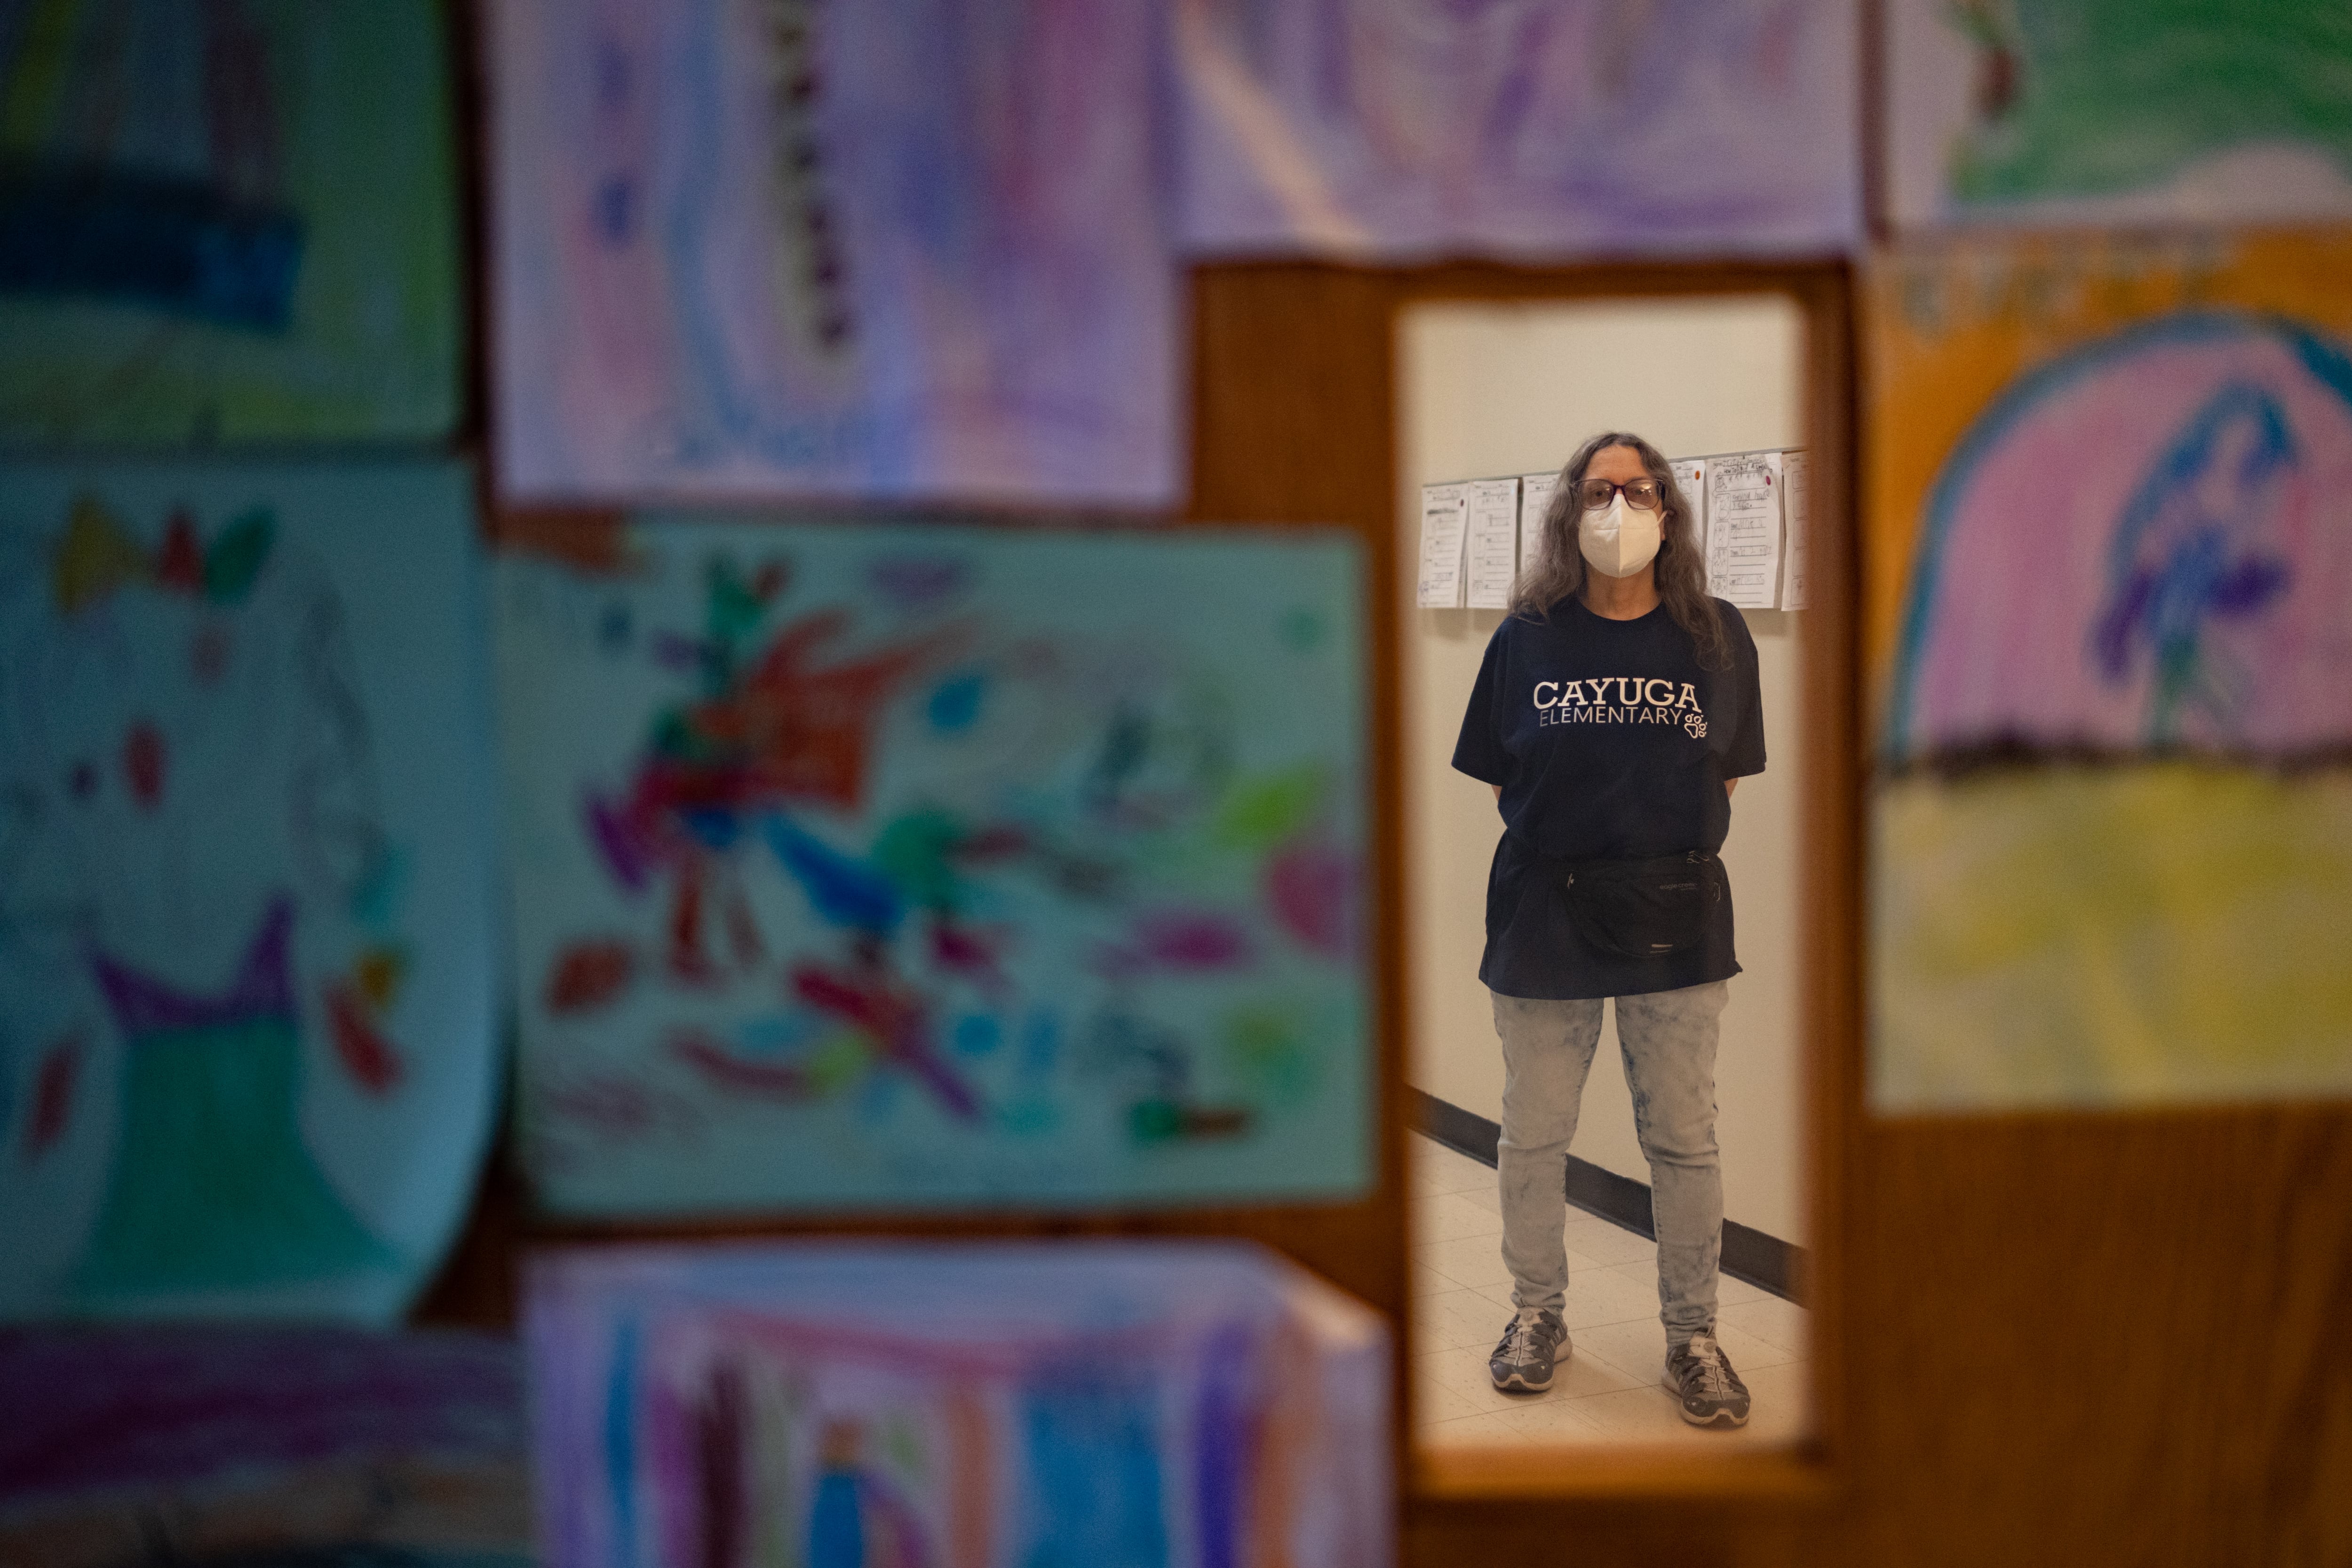 An older woman, wearing a filtered mask and blue Cayuga Elementary School shirt, stands in the window of a classroom door. Student artwork adds color to the wooden door she is standing behind.